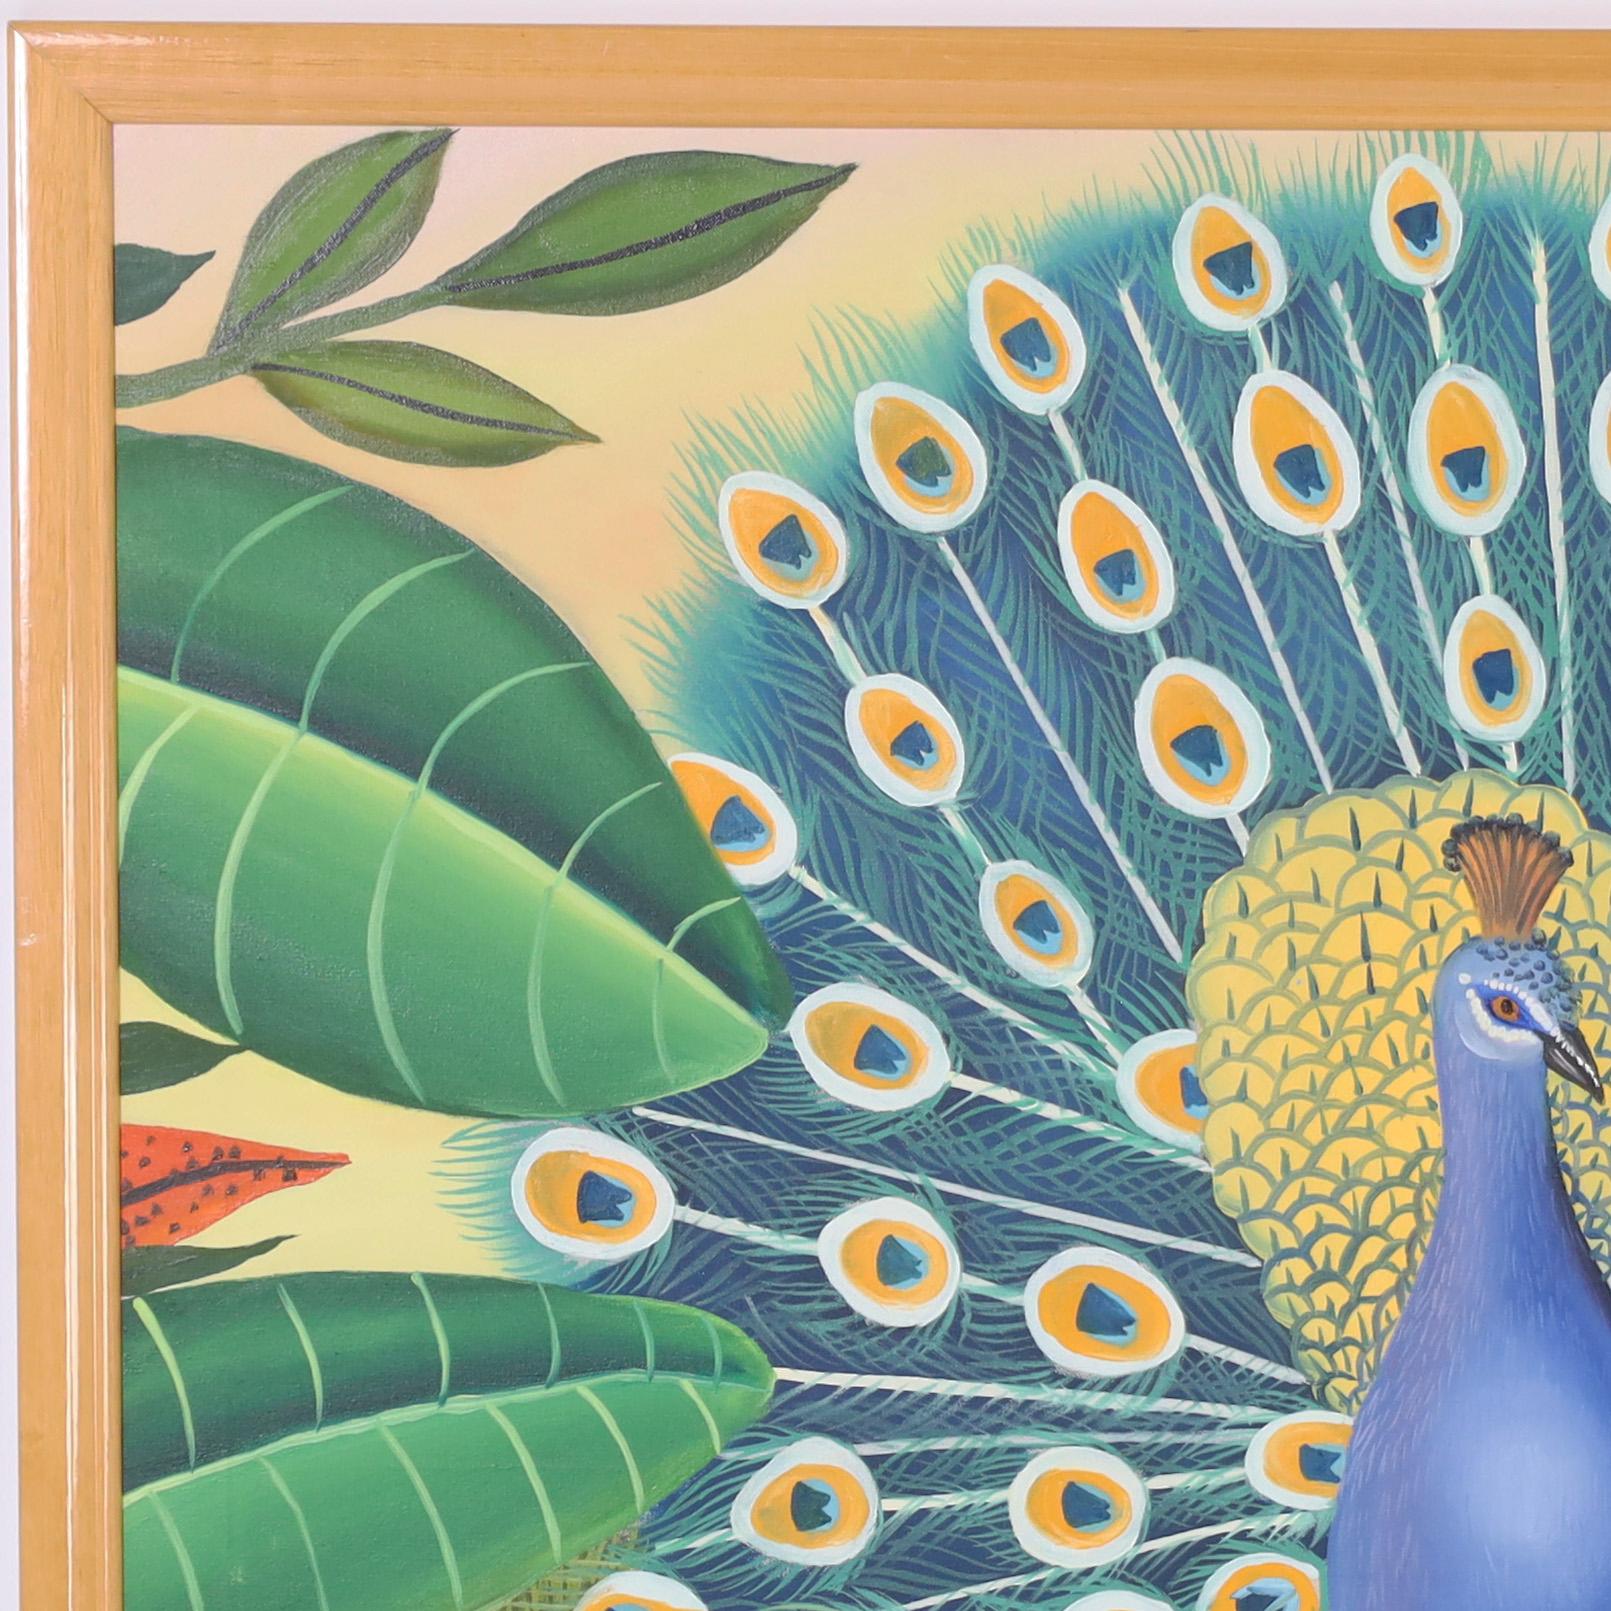 Branko Paradis Painting on Canvas of a Peacock For Sale 1